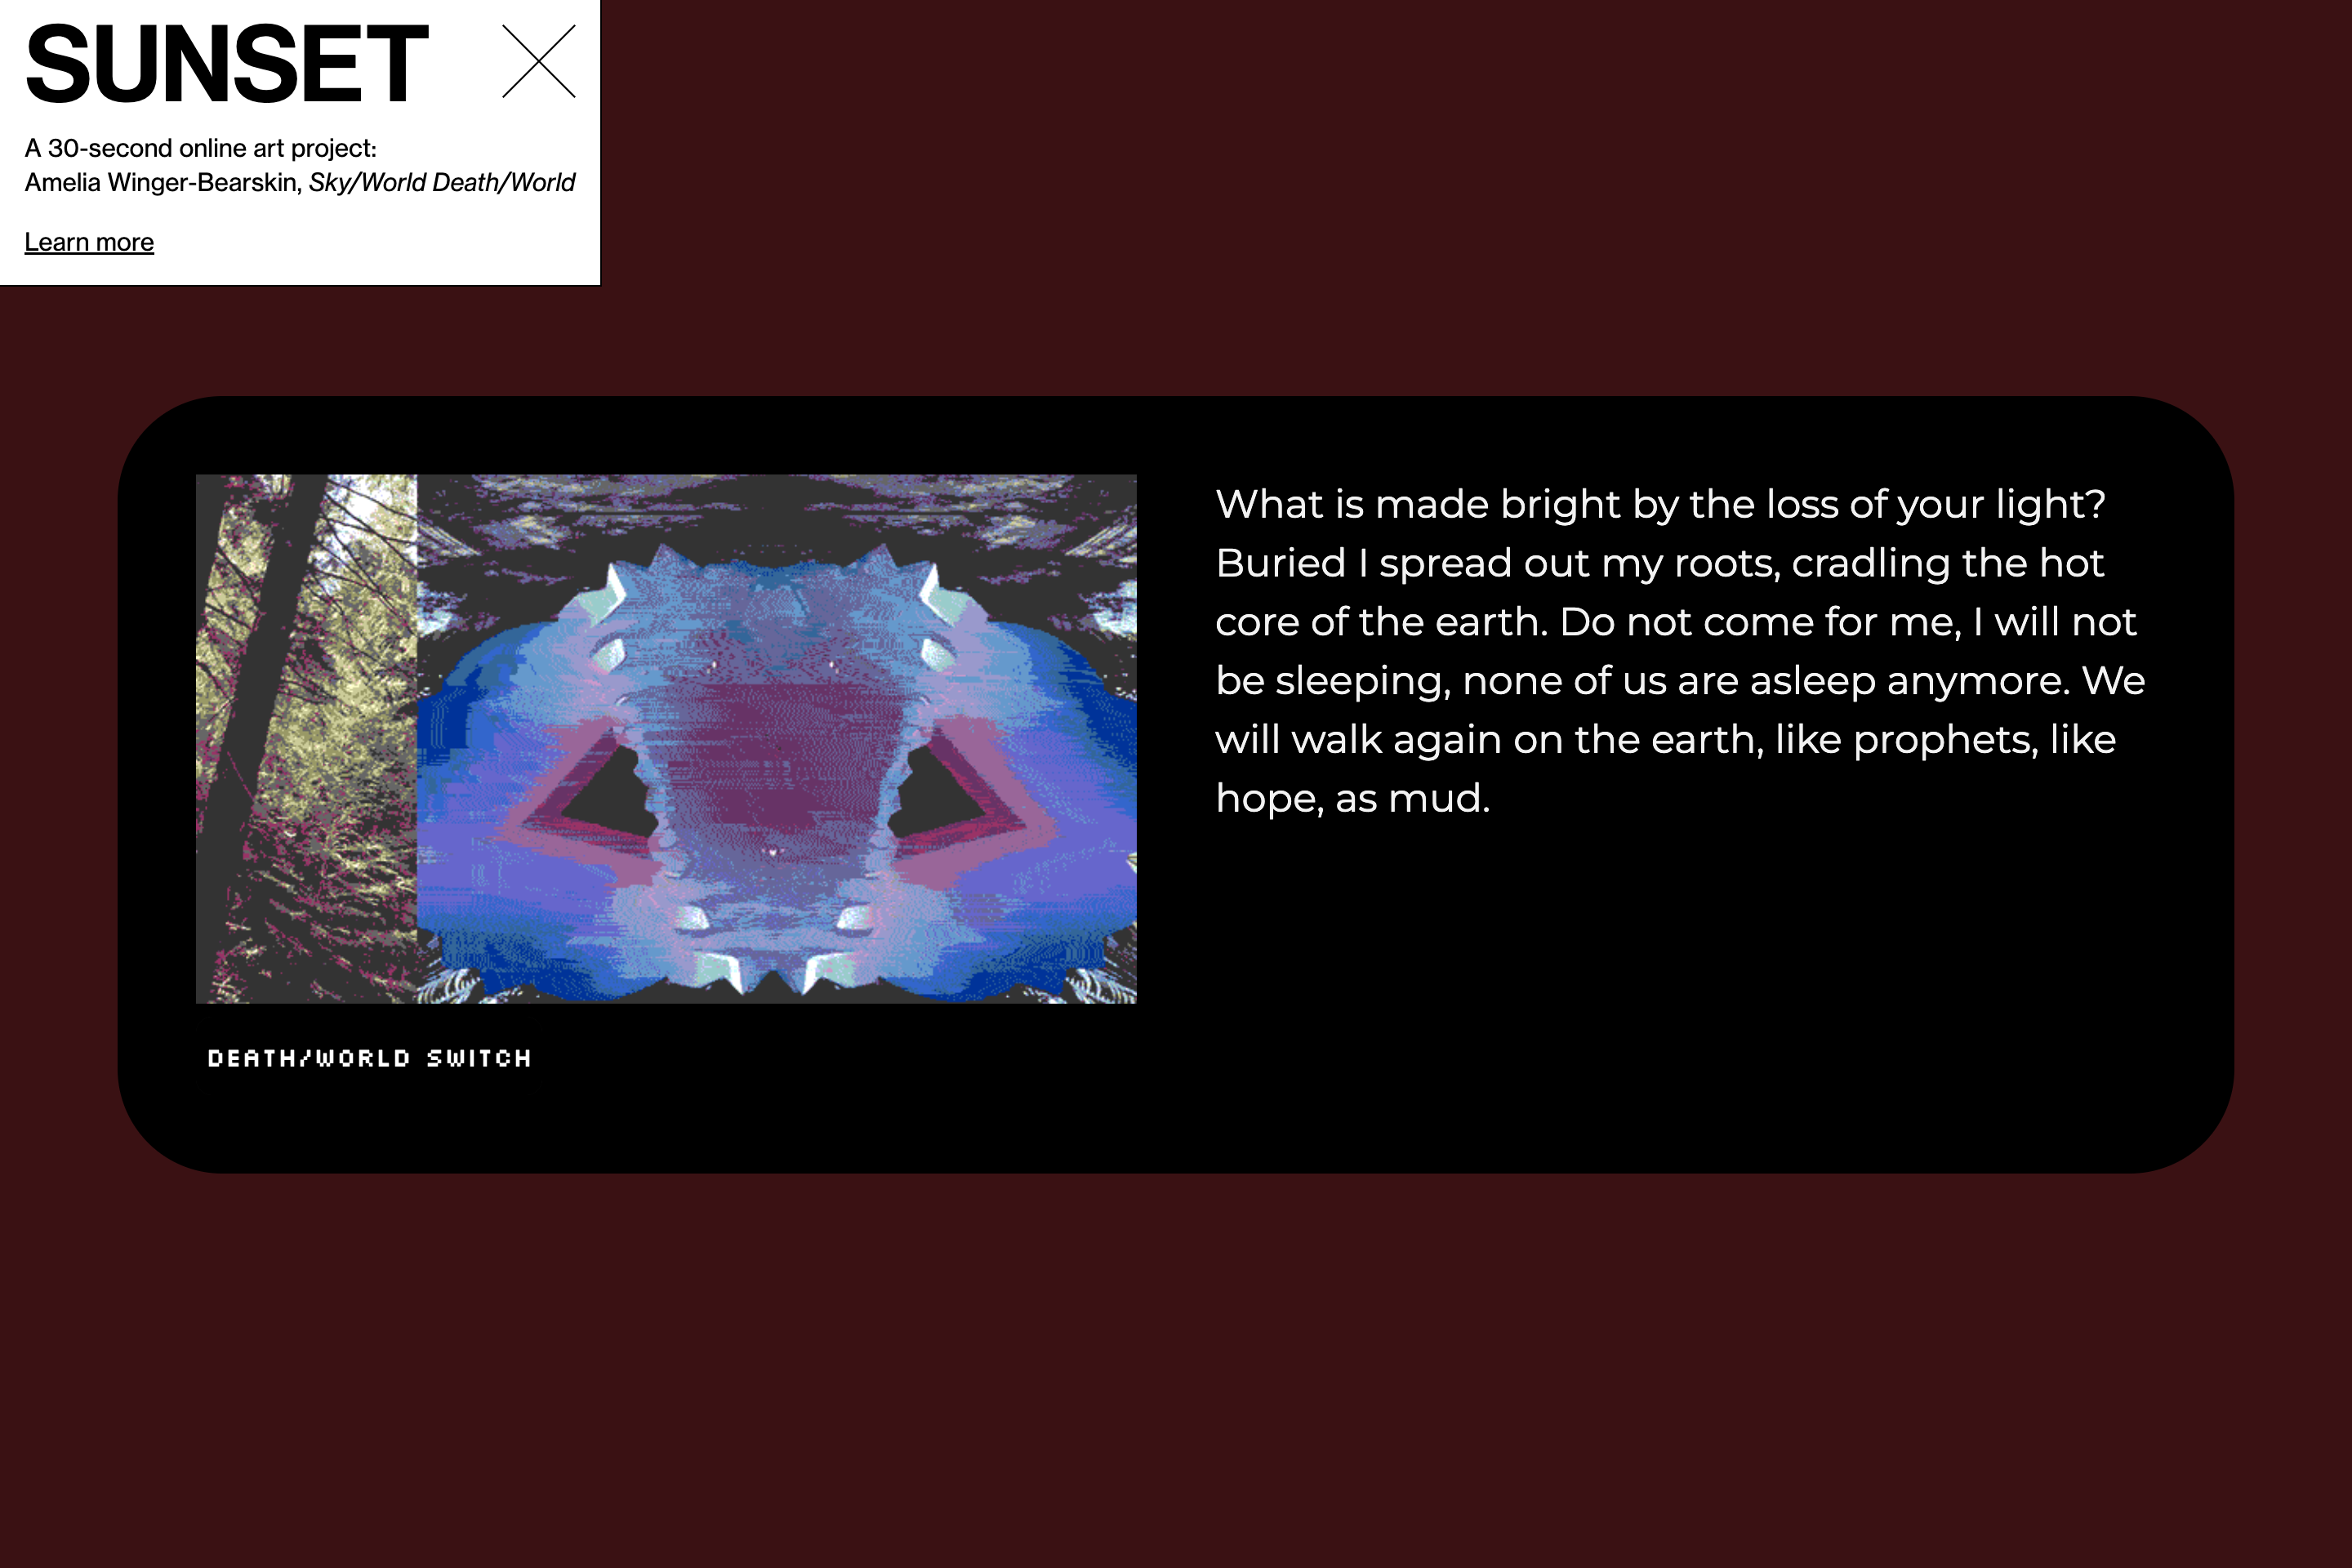 Screenshot of webpage with a diptych image on the left, with trees on one side and blue and purple mirrored shapes on the other, and a poem on the right. The image and the poem are contained within a black shape, with a maroon background behind.